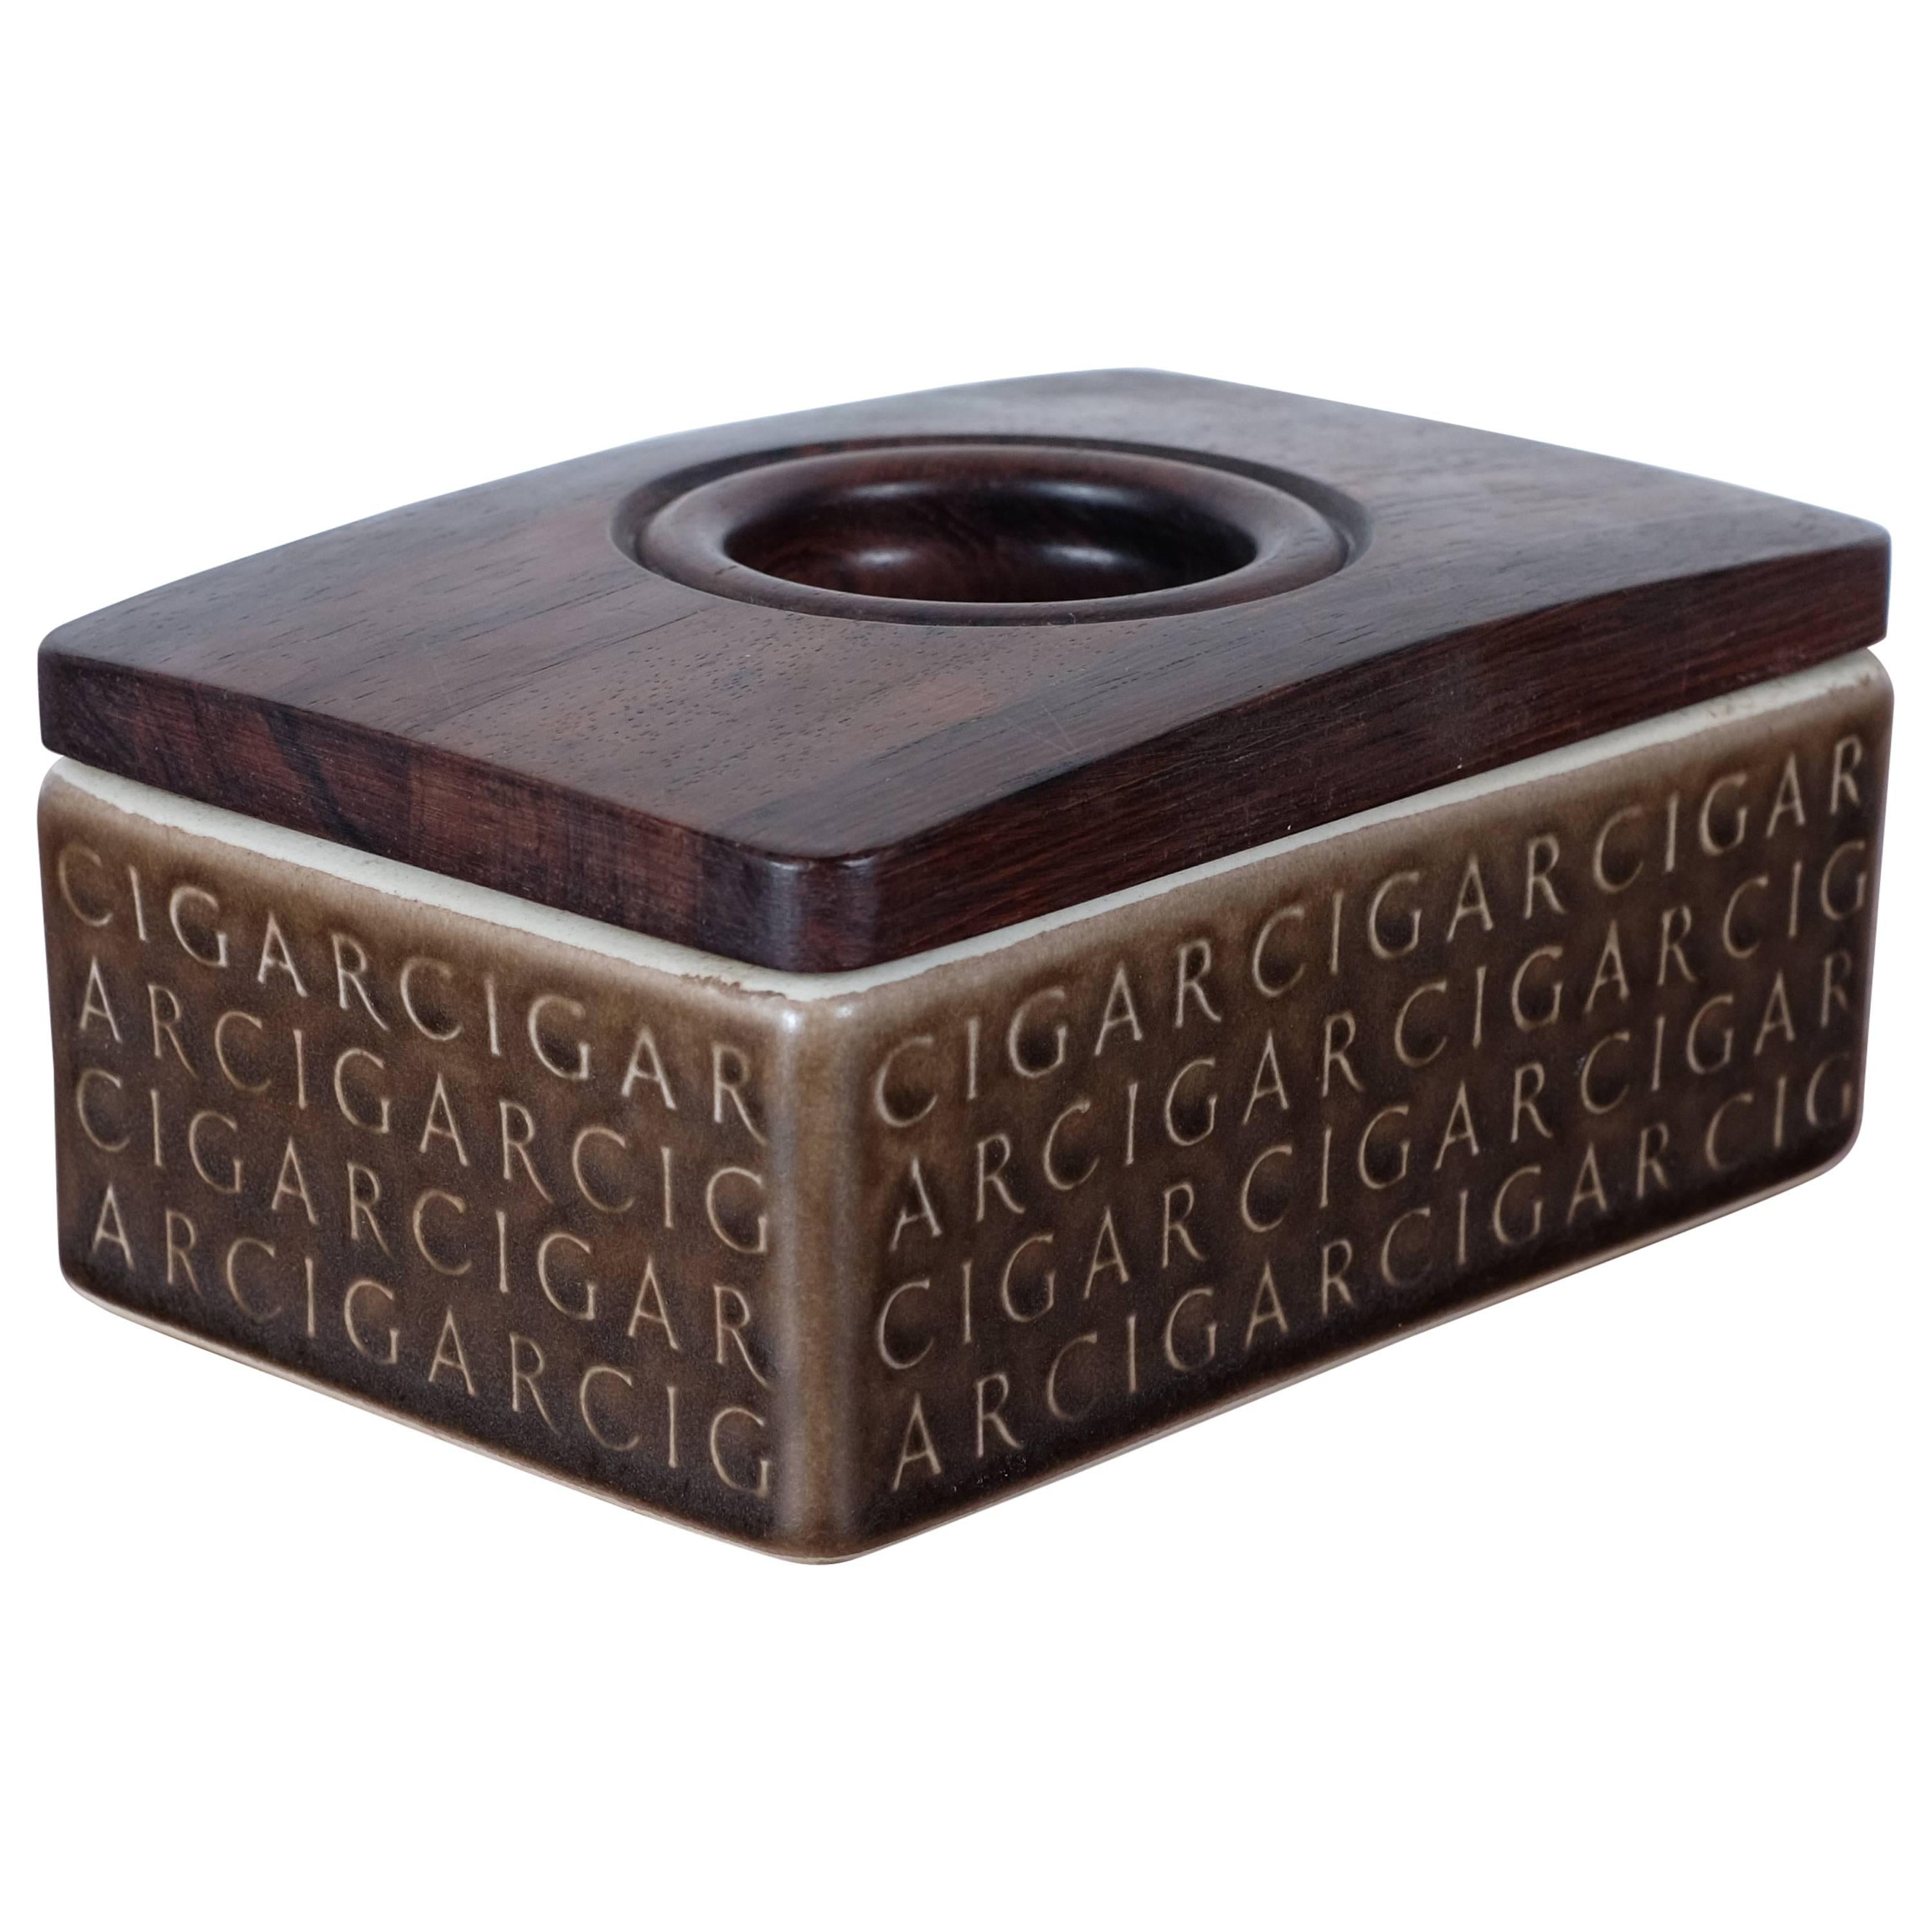 Jens Harald Quistgaard Cigar Box with Rosewood Lid